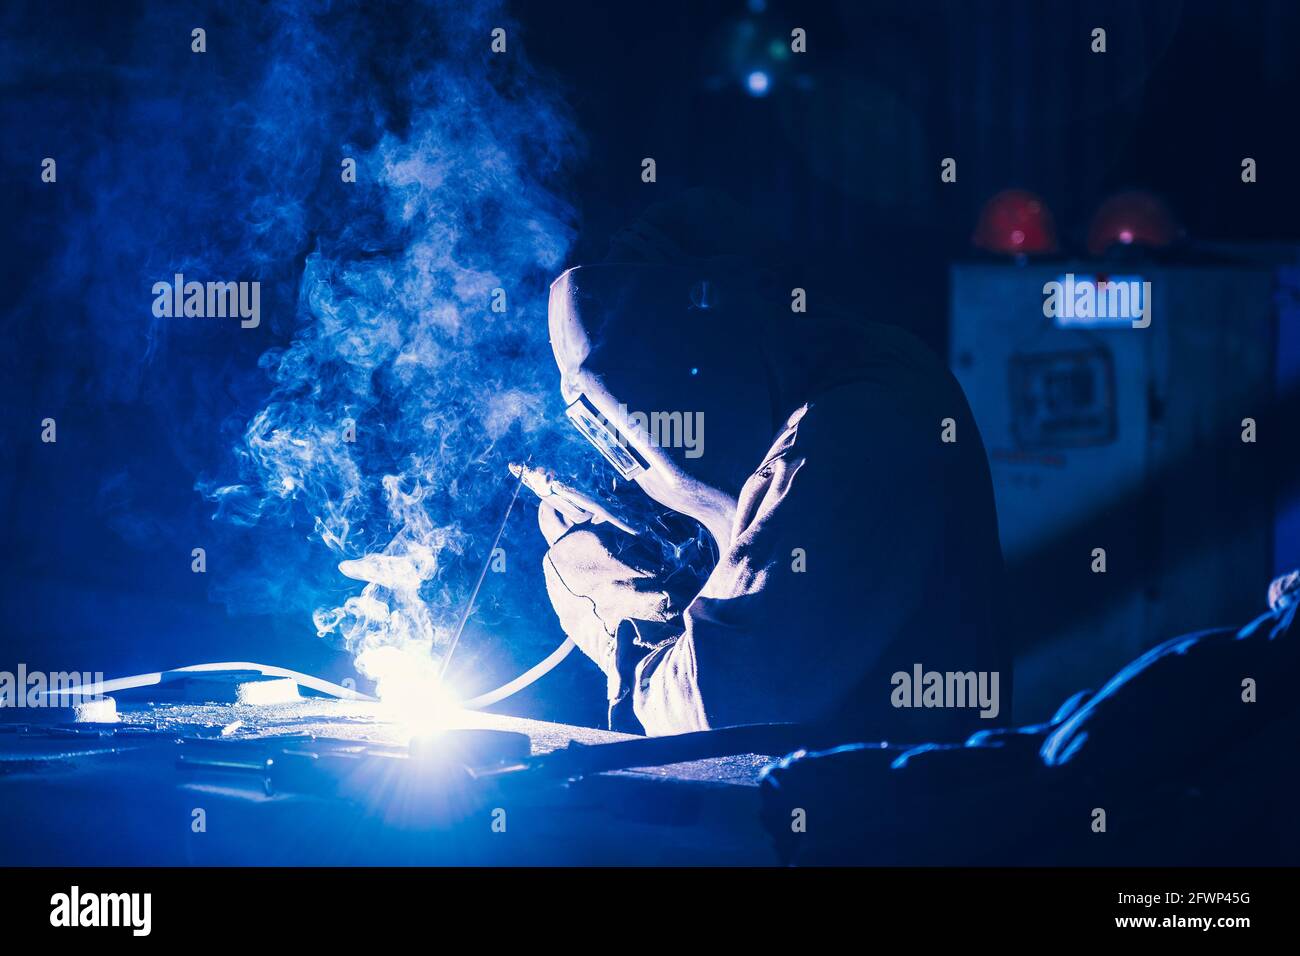 Welder in protective mask, sparks and smoke from welding flares, industrial background. Stock Photo